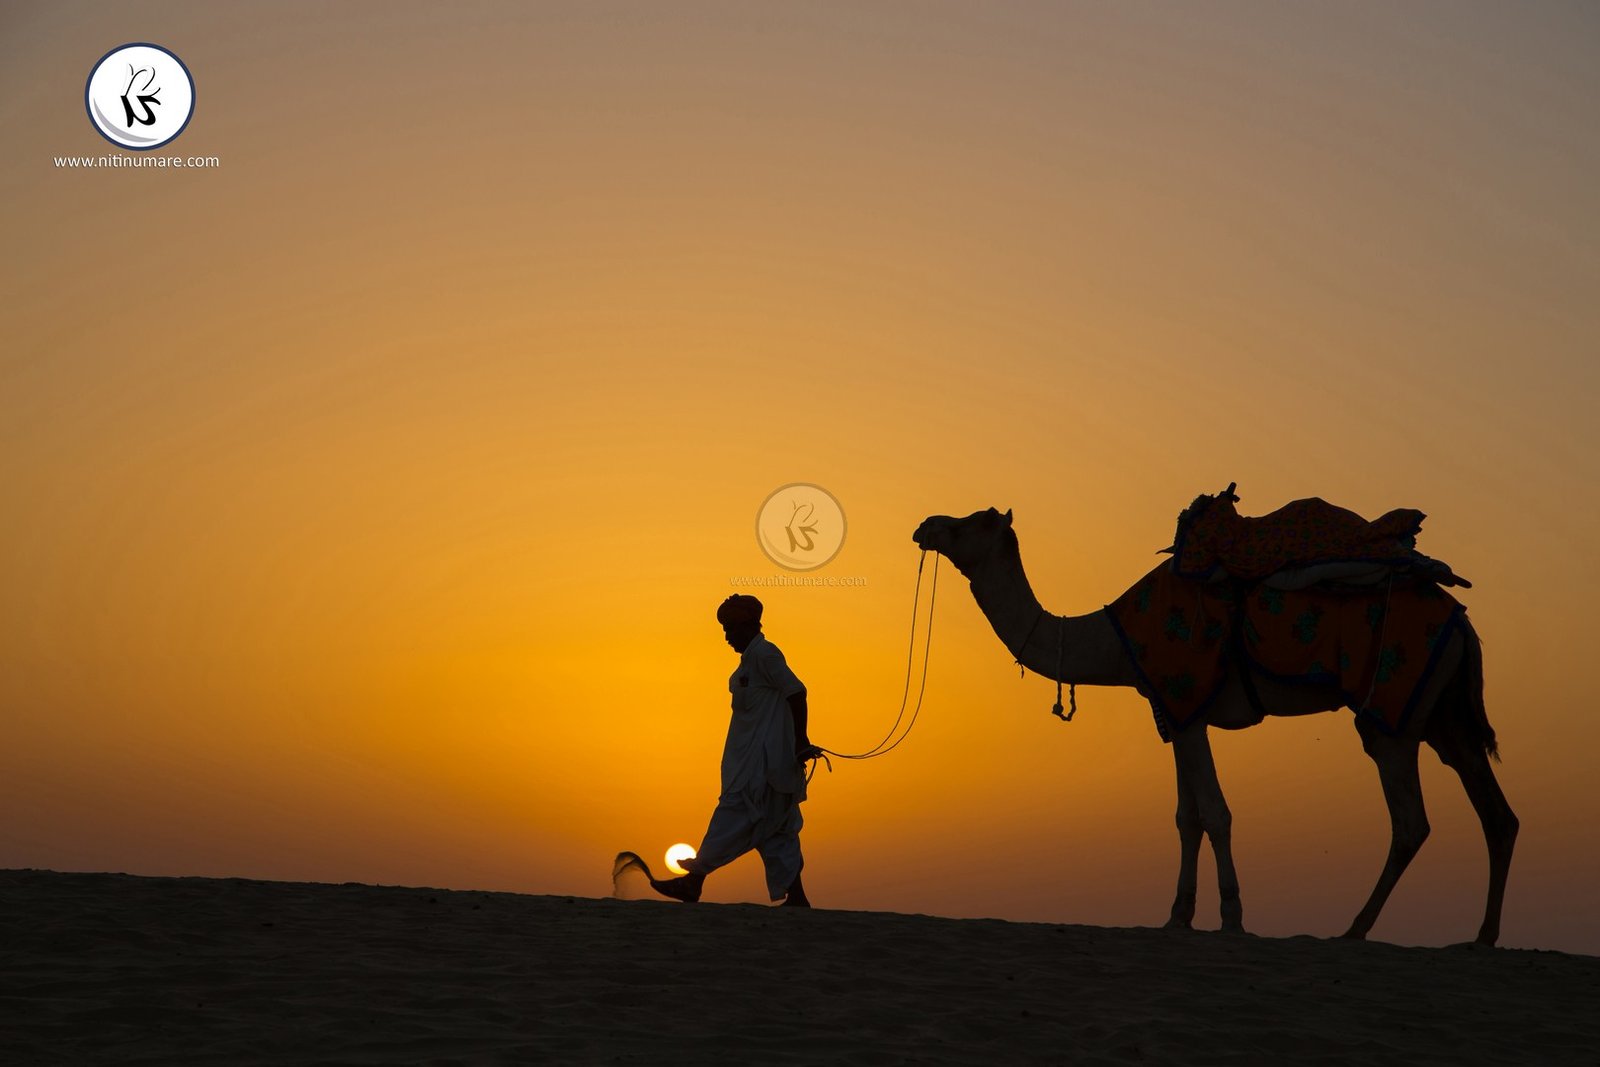 Nice landscape having golden color of sunrise captured with walking person and his camel.